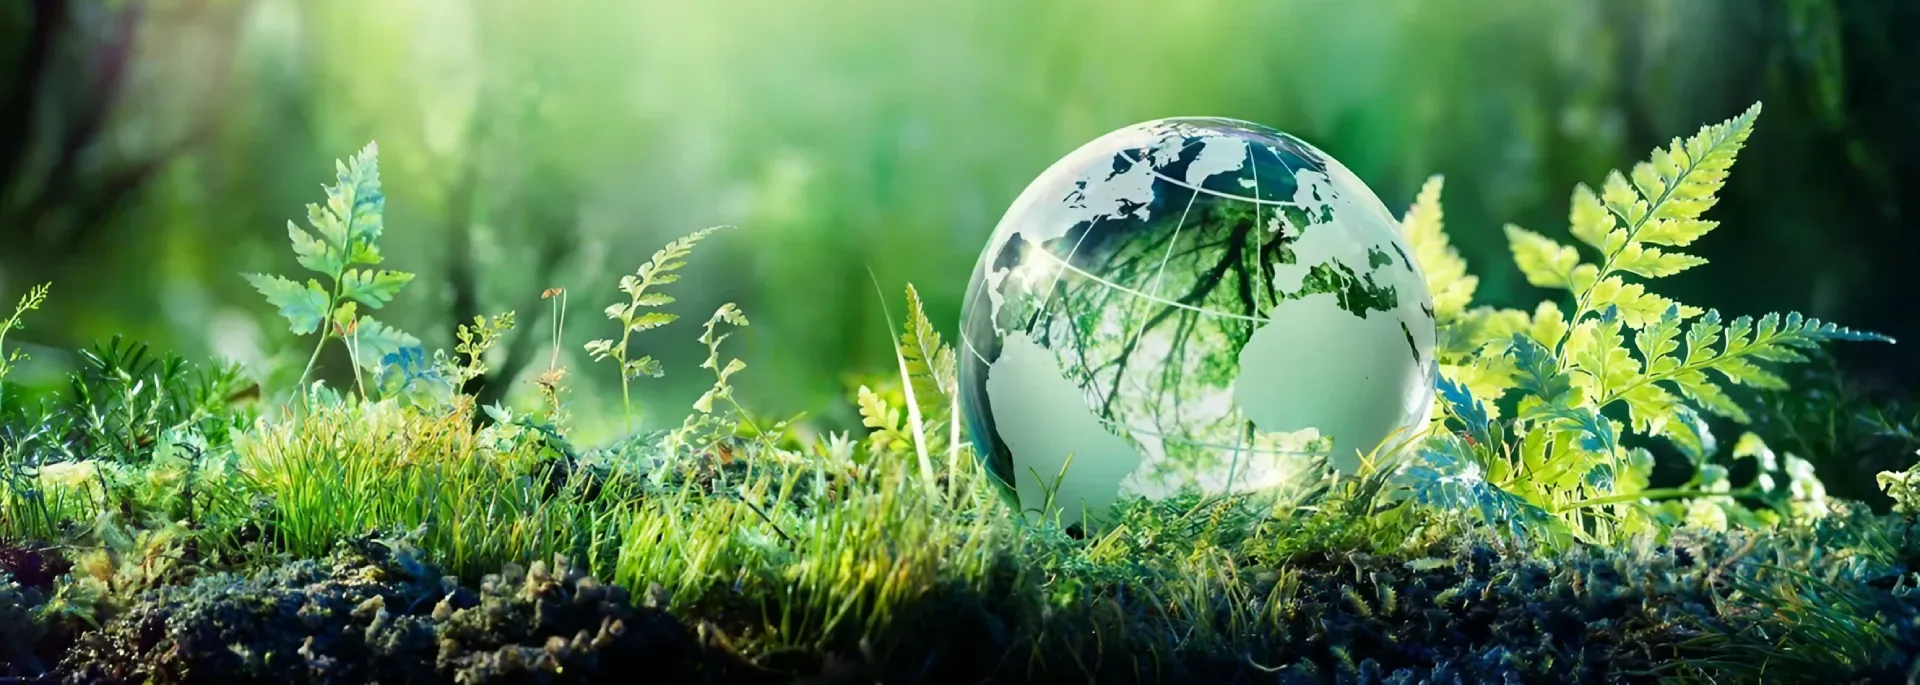 A globe sitting in the grass with trees and plants